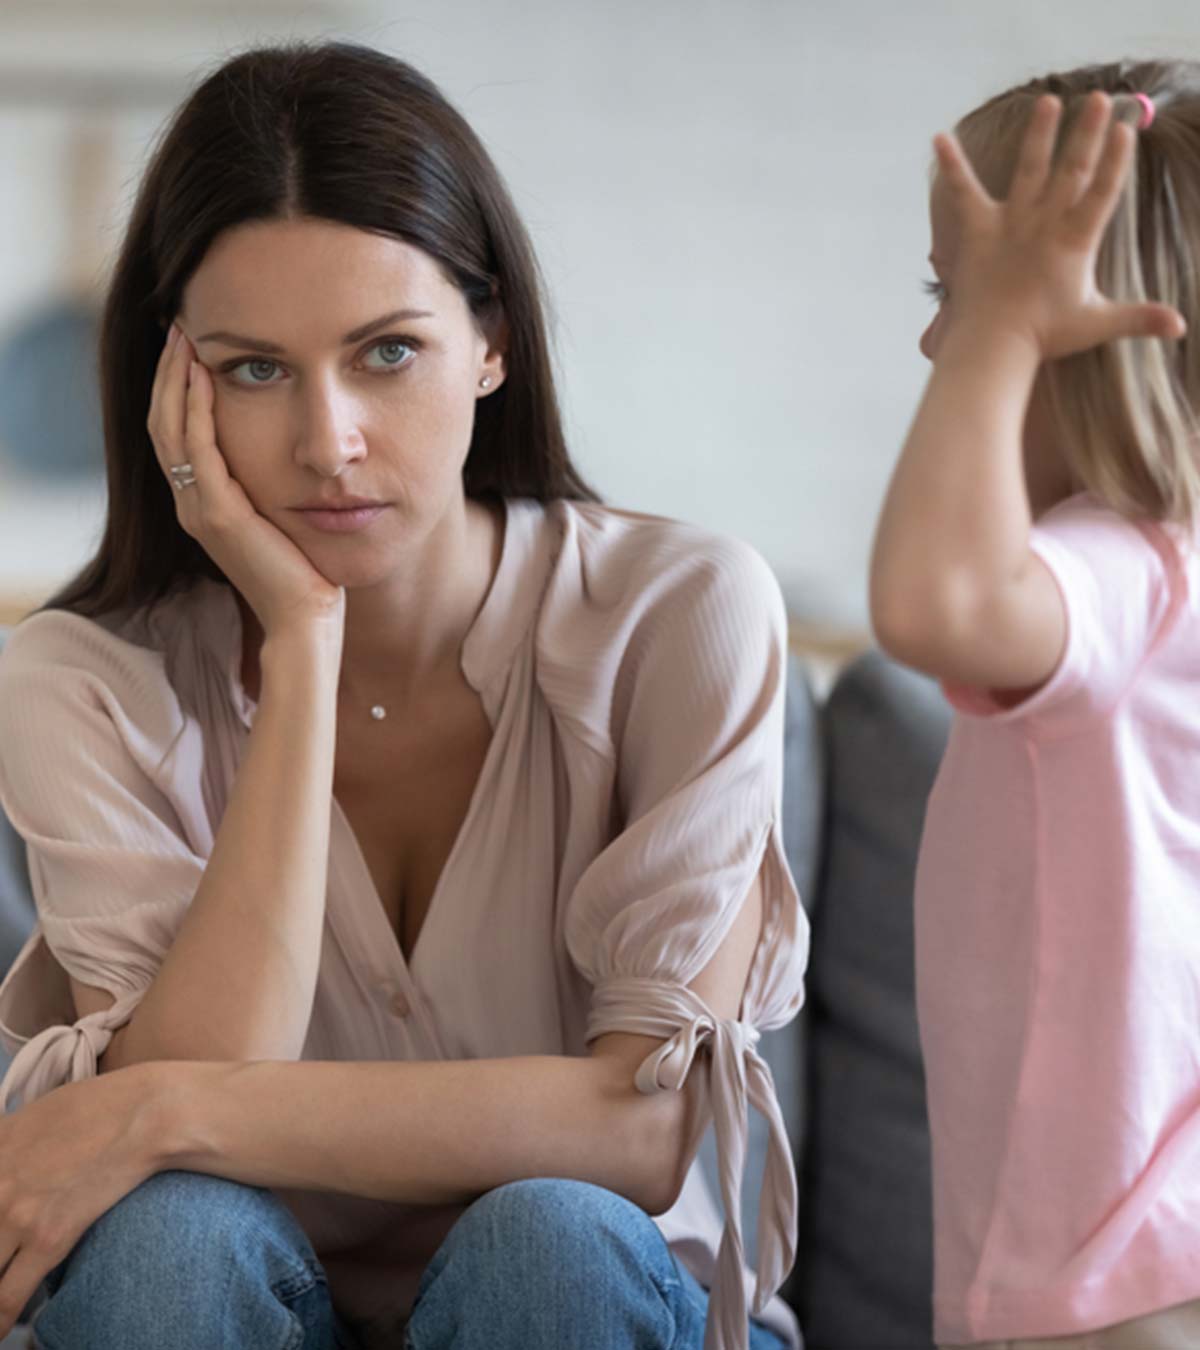 14 Practical Tips To Deal With A Difficult Child